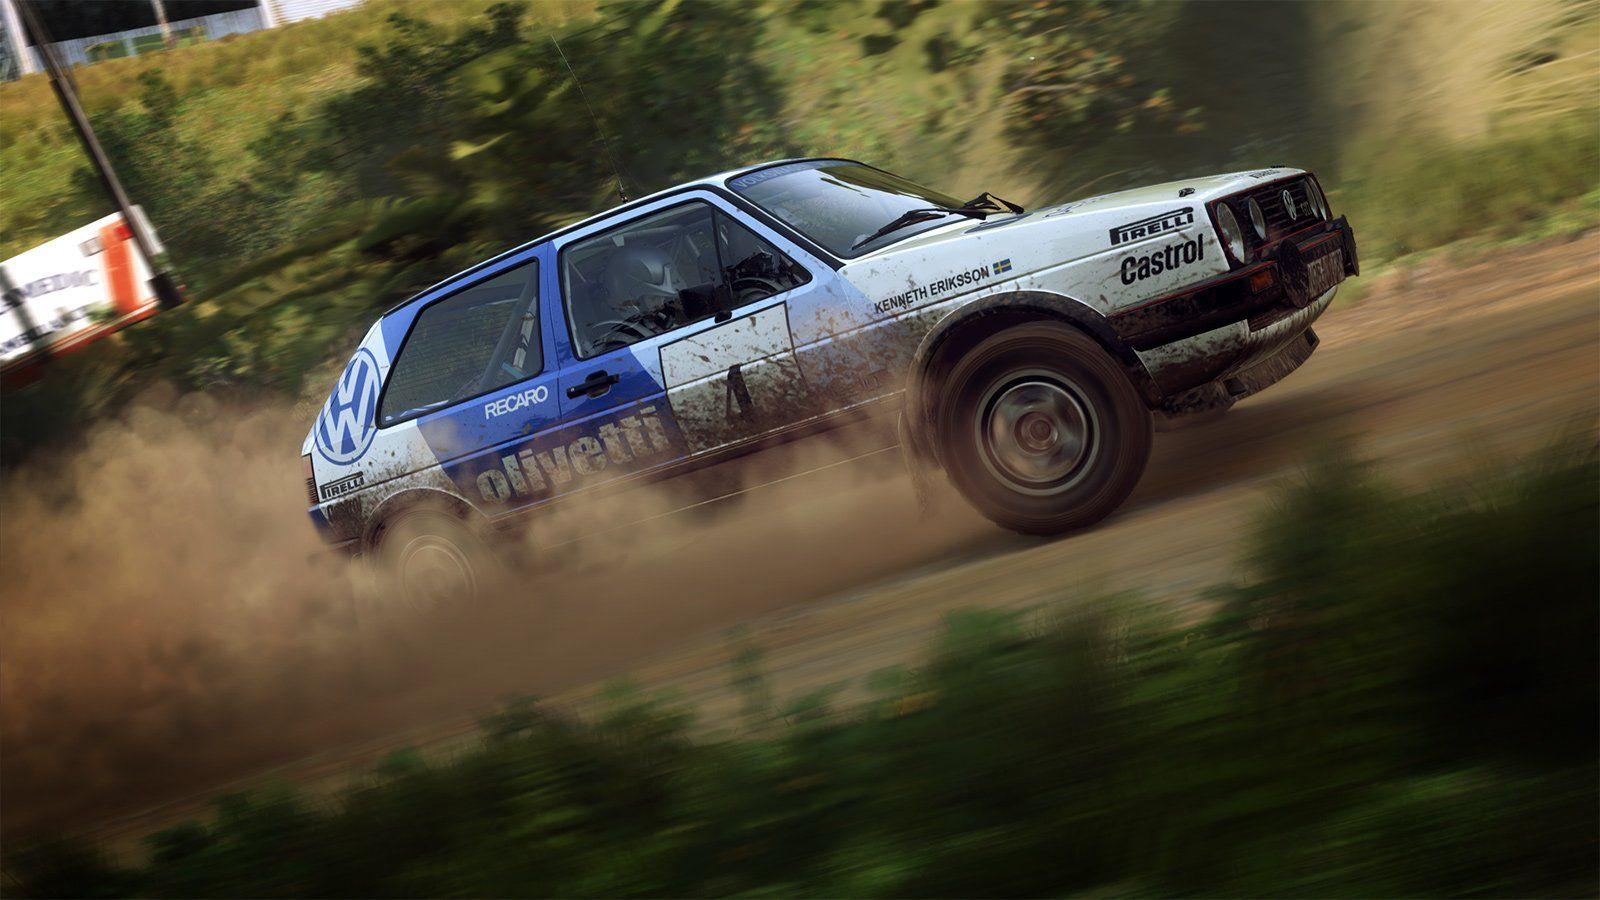 DiRT Rally 2.0 Announced, Leaves the Garage February 2019. Pure